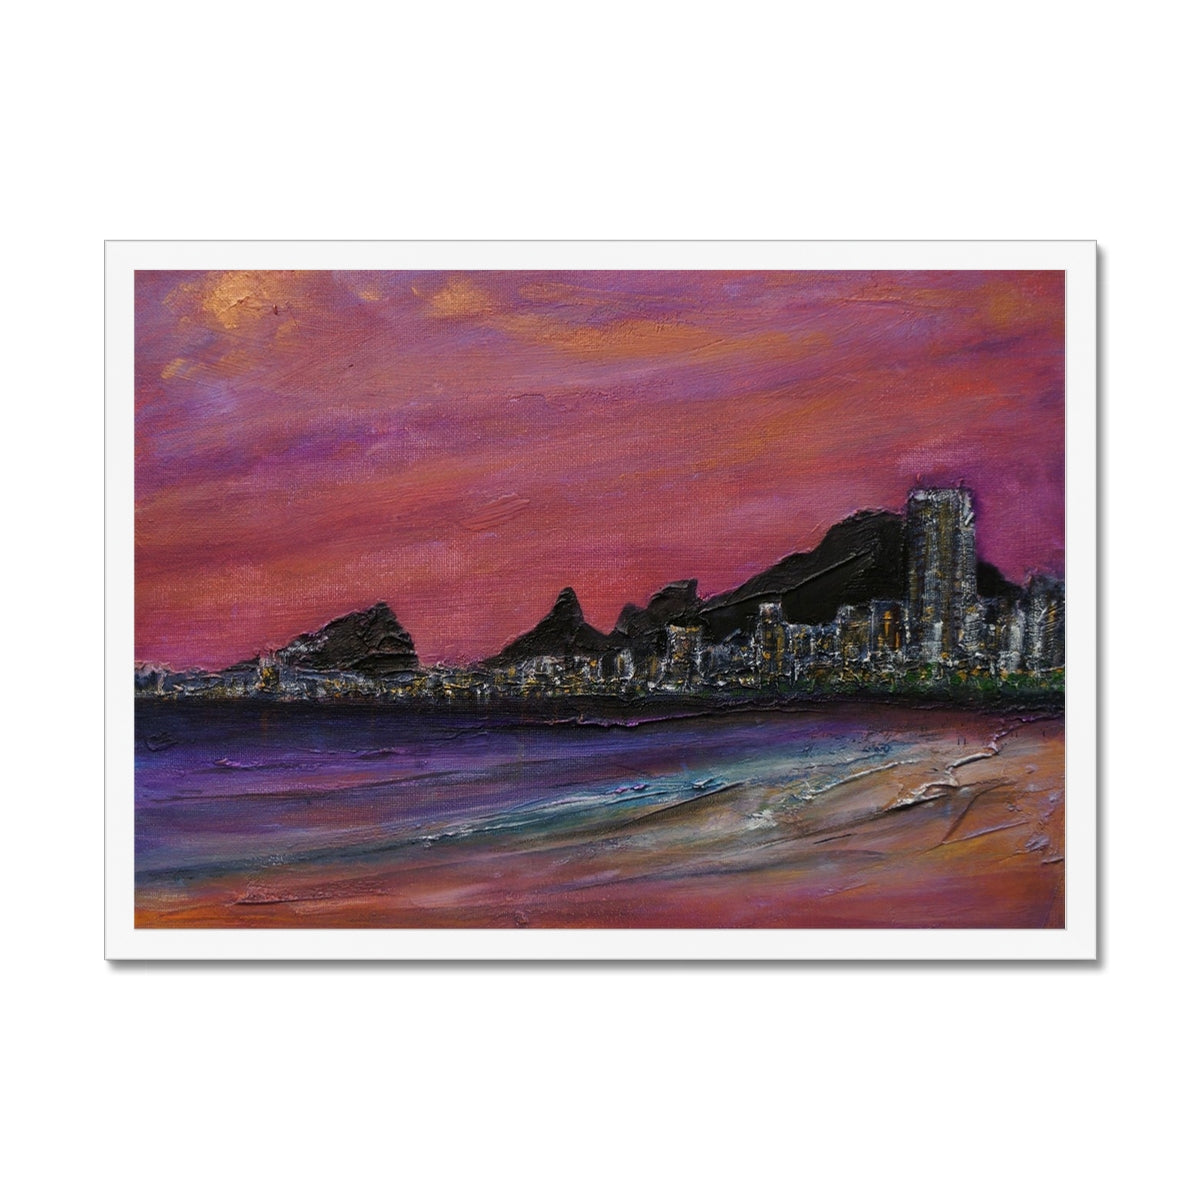 Copacabana Beach Dusk Painting | Framed Prints From Scotland-Framed Prints-World Art Gallery-A2 Landscape-White Frame-Paintings, Prints, Homeware, Art Gifts From Scotland By Scottish Artist Kevin Hunter